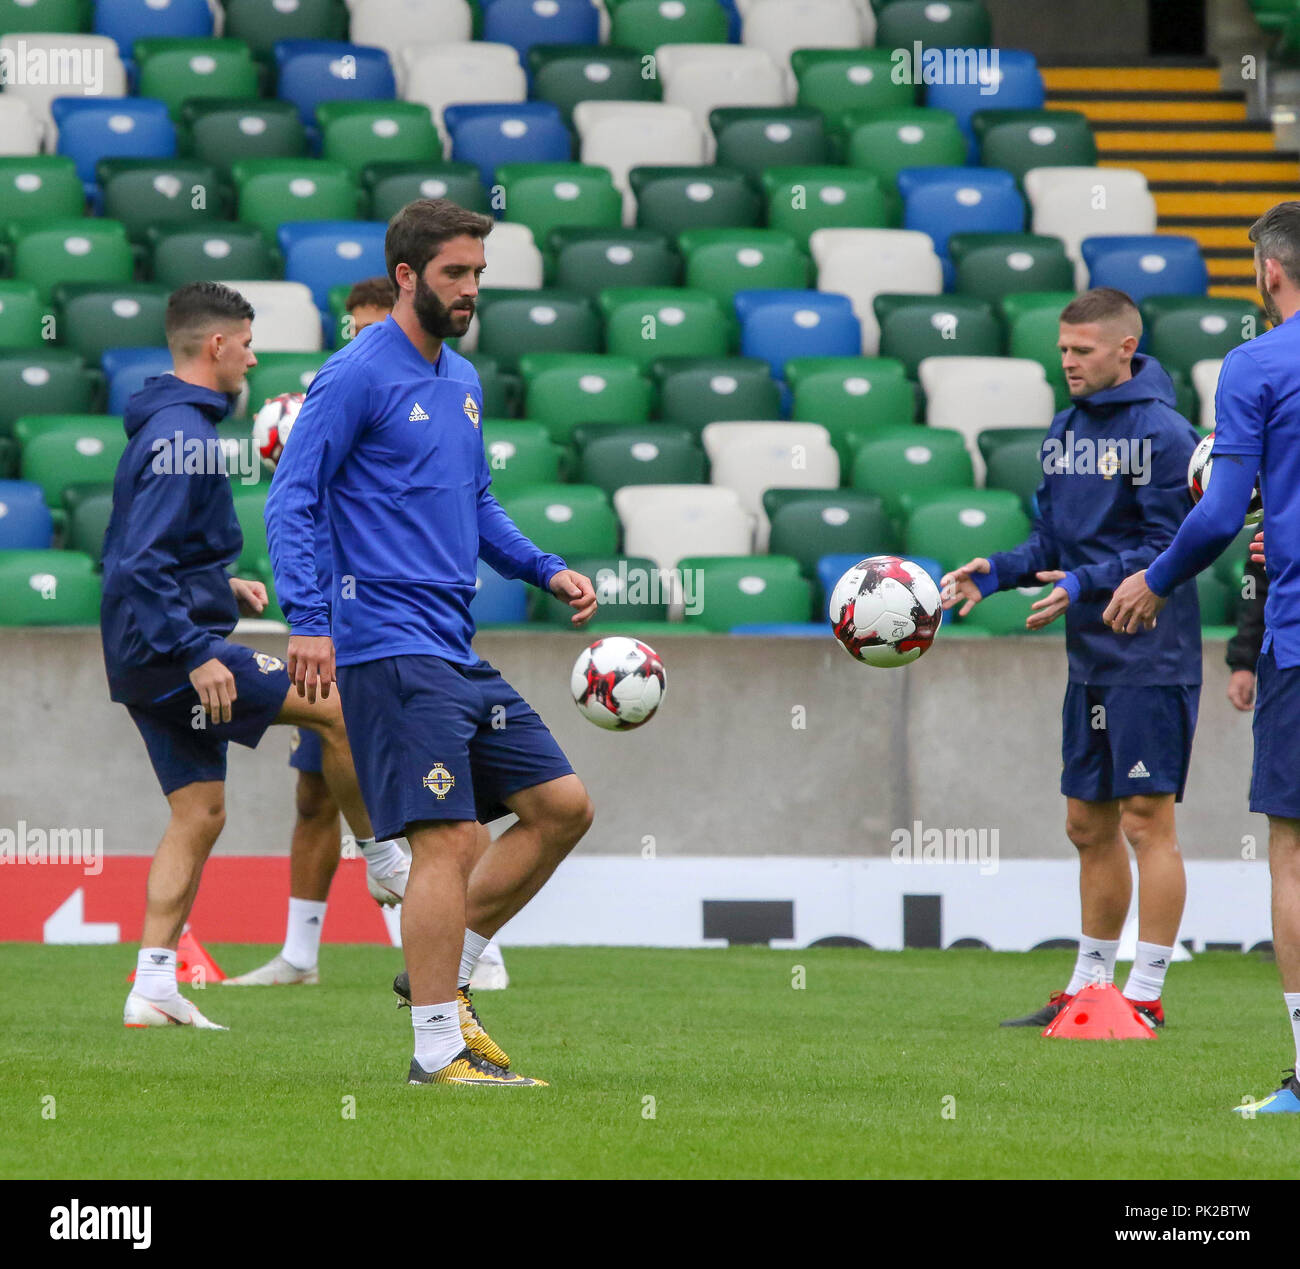 Windsor Park, Belfast, Northern Ireland. 10 September 2018. After Saturday's defeat in the UEFA Nations League, Northern Ireland returned to training this morning at Windsor Park. Tomorrow night they play Israel in a friendly international. Will Grigg in training. Credit: David Hunter/Alamy Live News. Stock Photo